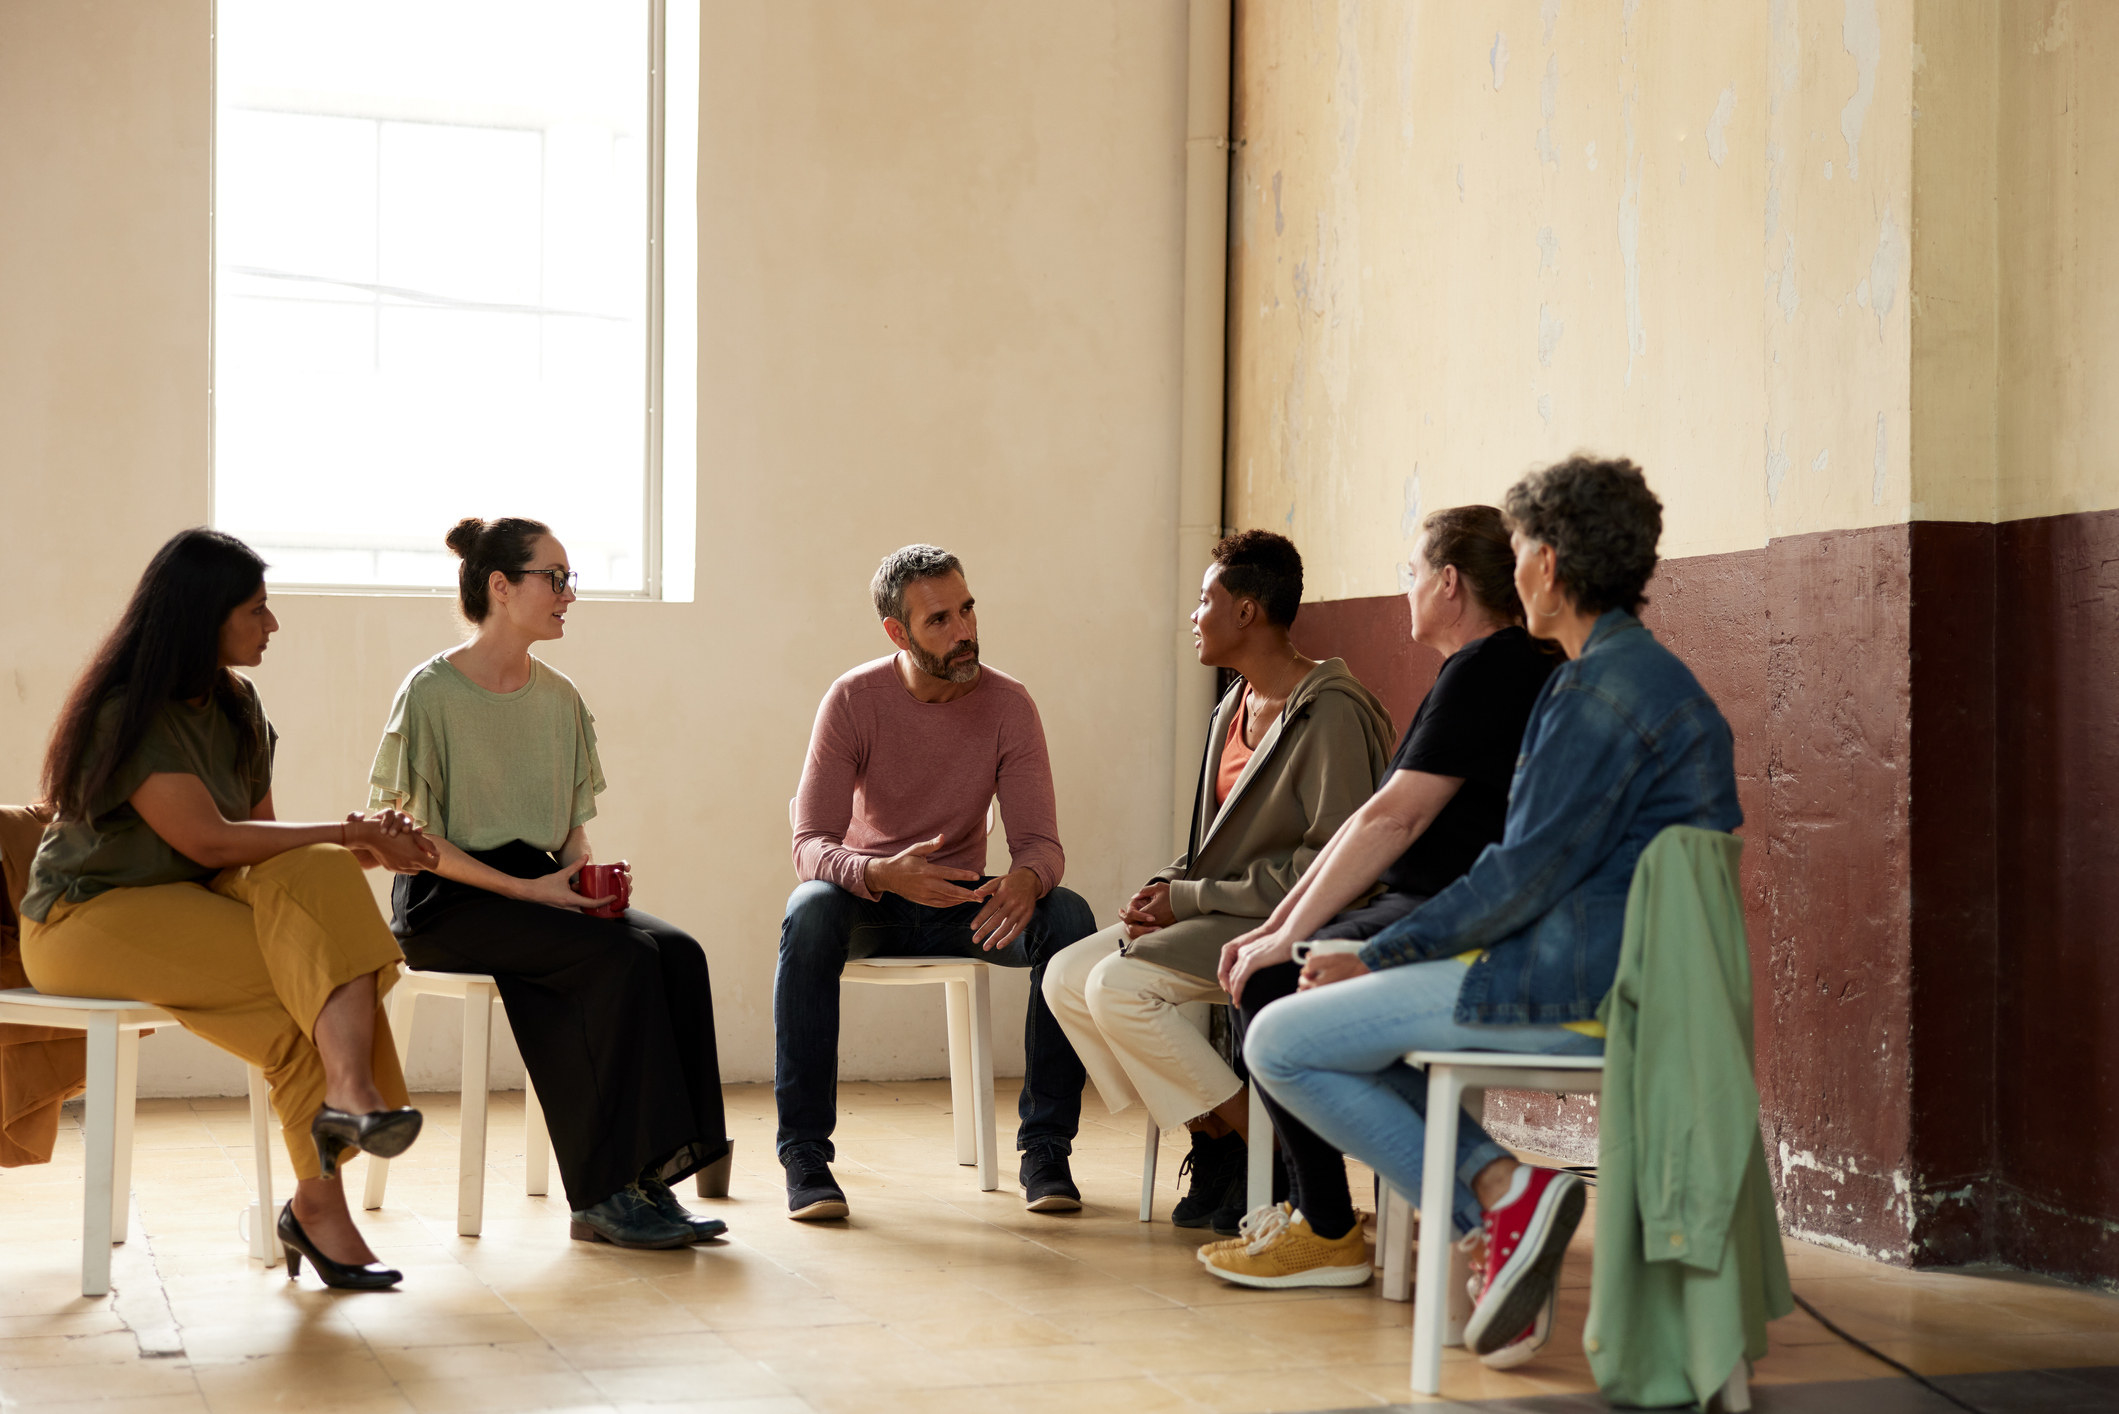 Alcoholics Anonymous participants in discussion while in chairs in a circle